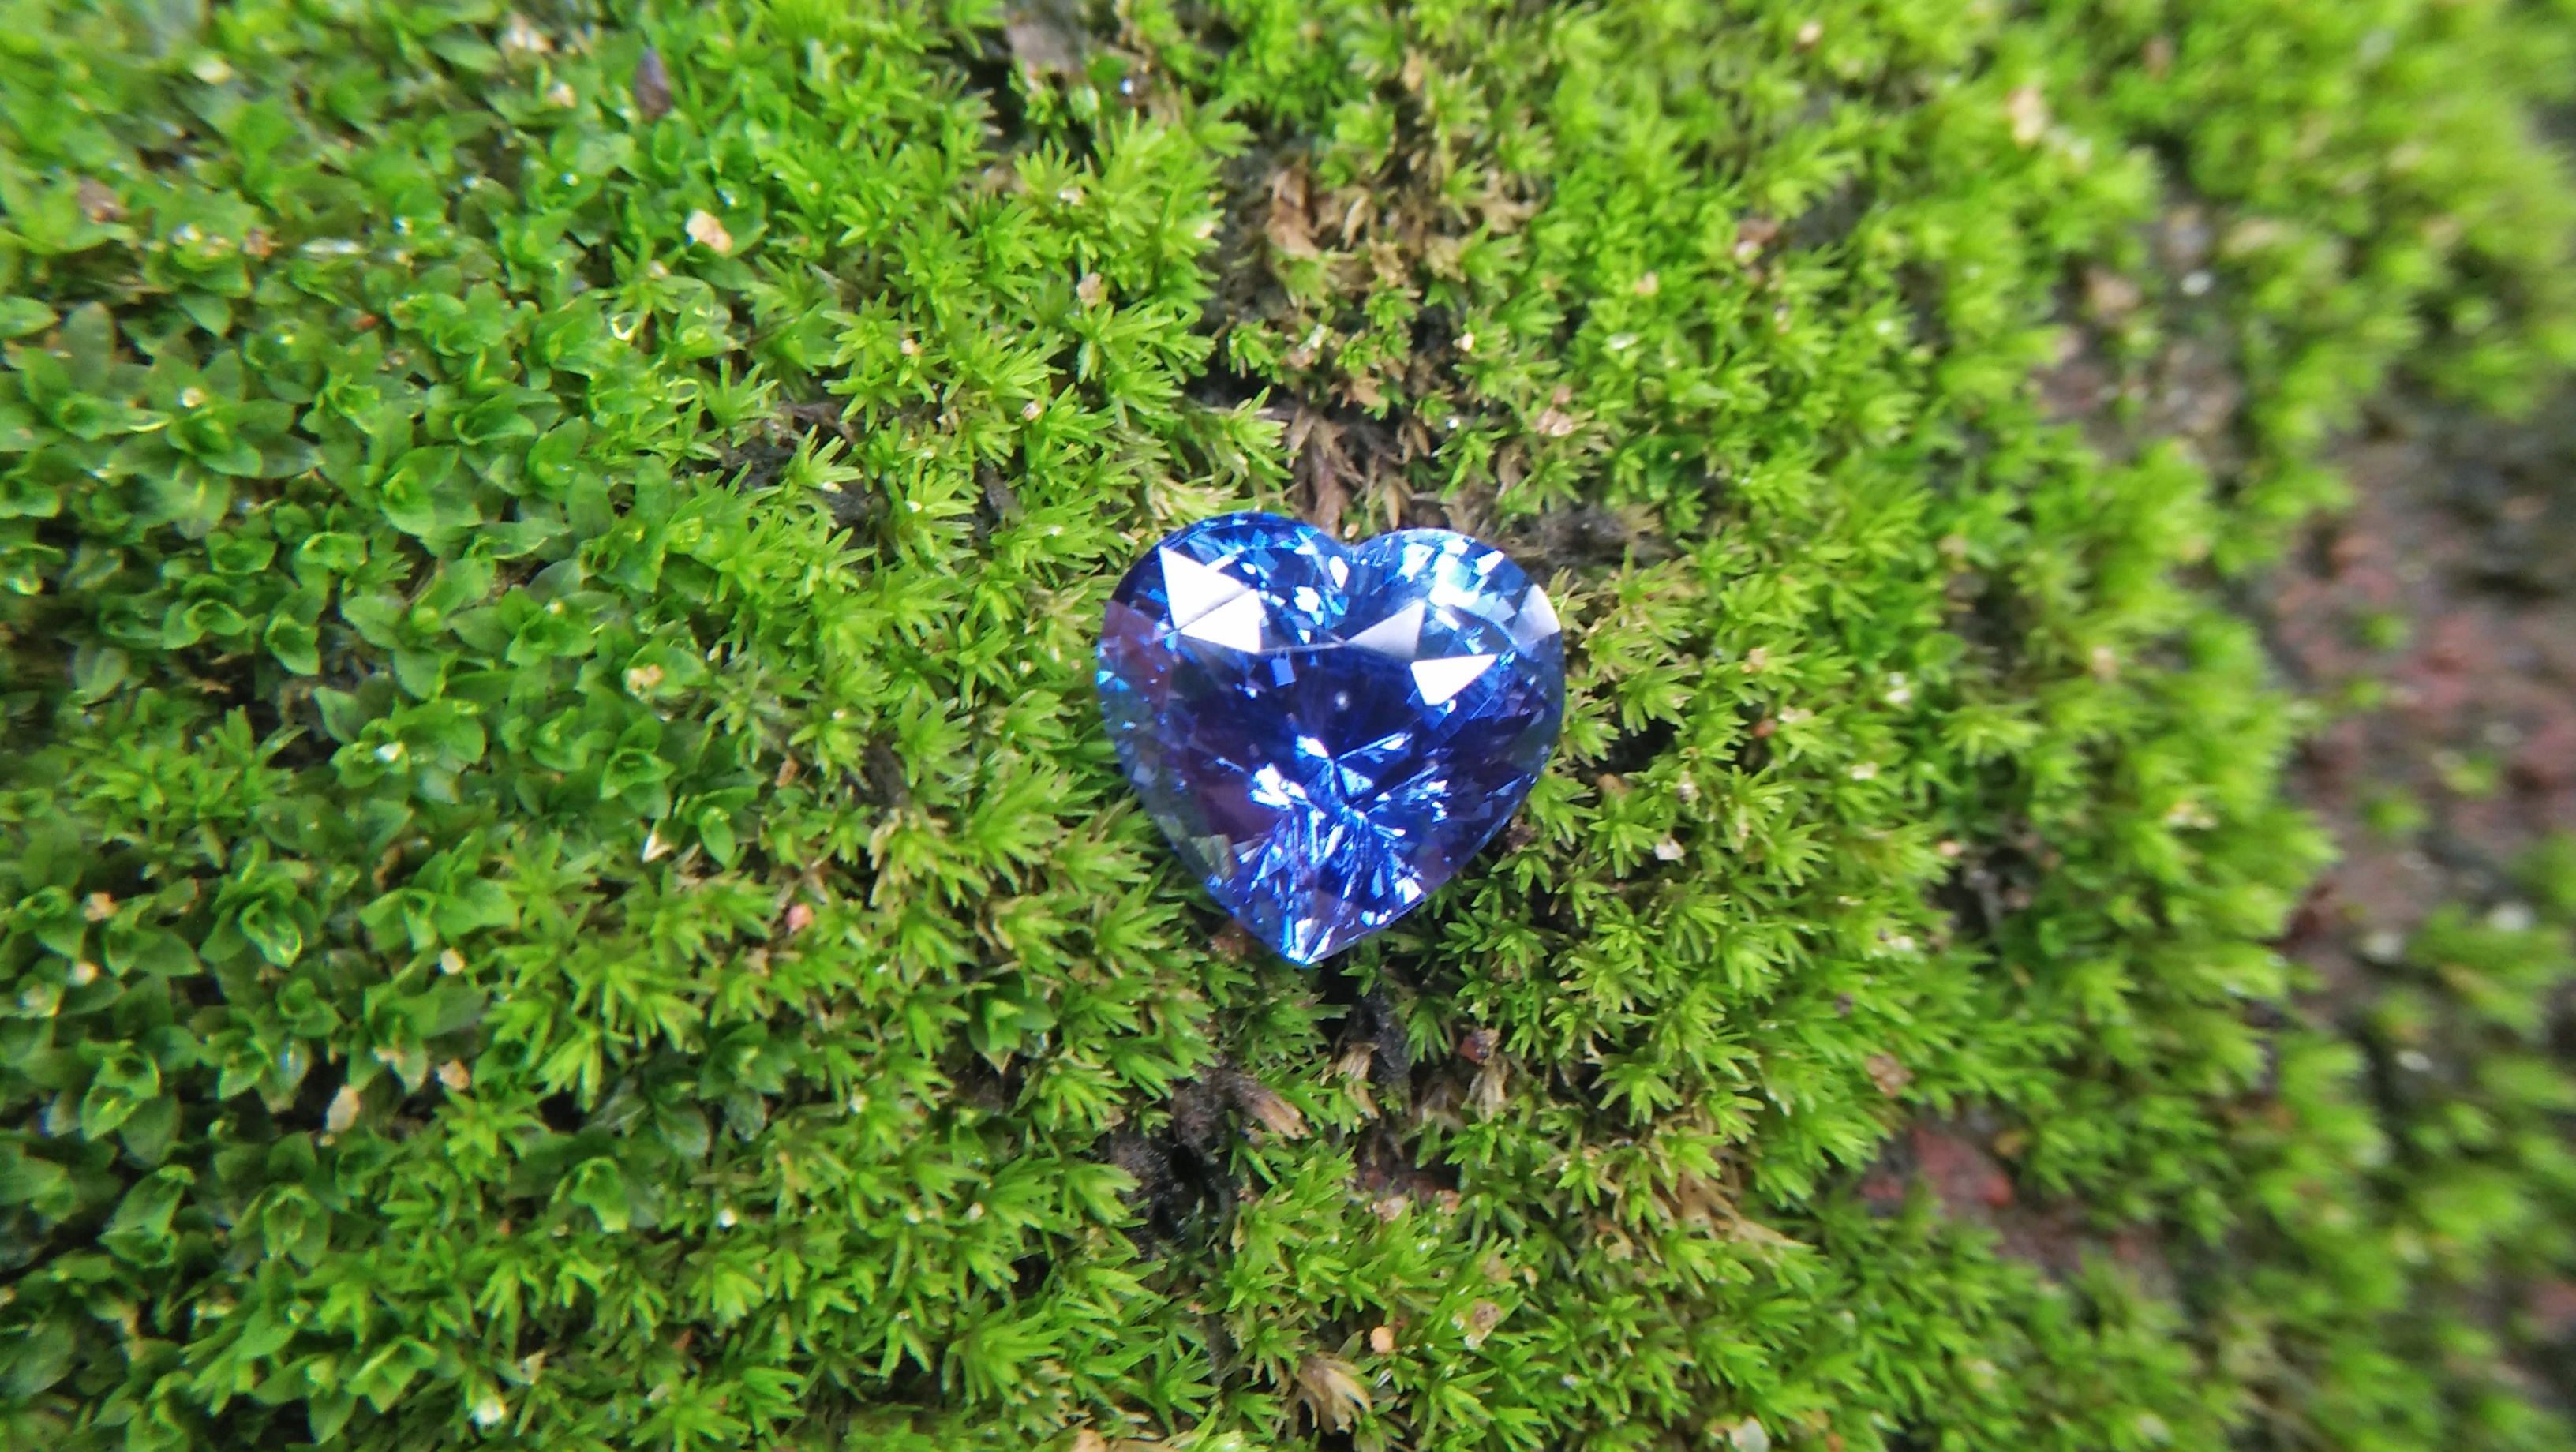 Sapphire is a precious gemstone, a variety of the mineral corundum, consisting of aluminium oxide Al2O3 with trace amounts of elements such as iron, titanium, chromium,copper, or magnesium. Category: Oxide mineral Formula: Aluminium oxide, Al2O3 Crystal system: Trigonal Crystal class: Hexagonal scalenohedral Mohs scale hardness: 9.0 Luster: Vitreous Specific gravity: 4.0 ~ 4.1 Sapphire is the birthstone for September Blue Sapphire is also very effective when it comes to channeling your healing powers from a higher source, which makes it a popular crystal for Reiki healers. It also has the ability to heal through the power of voice. When it comes to physical healing, Blue Sapphire can help in the overall healing of the body